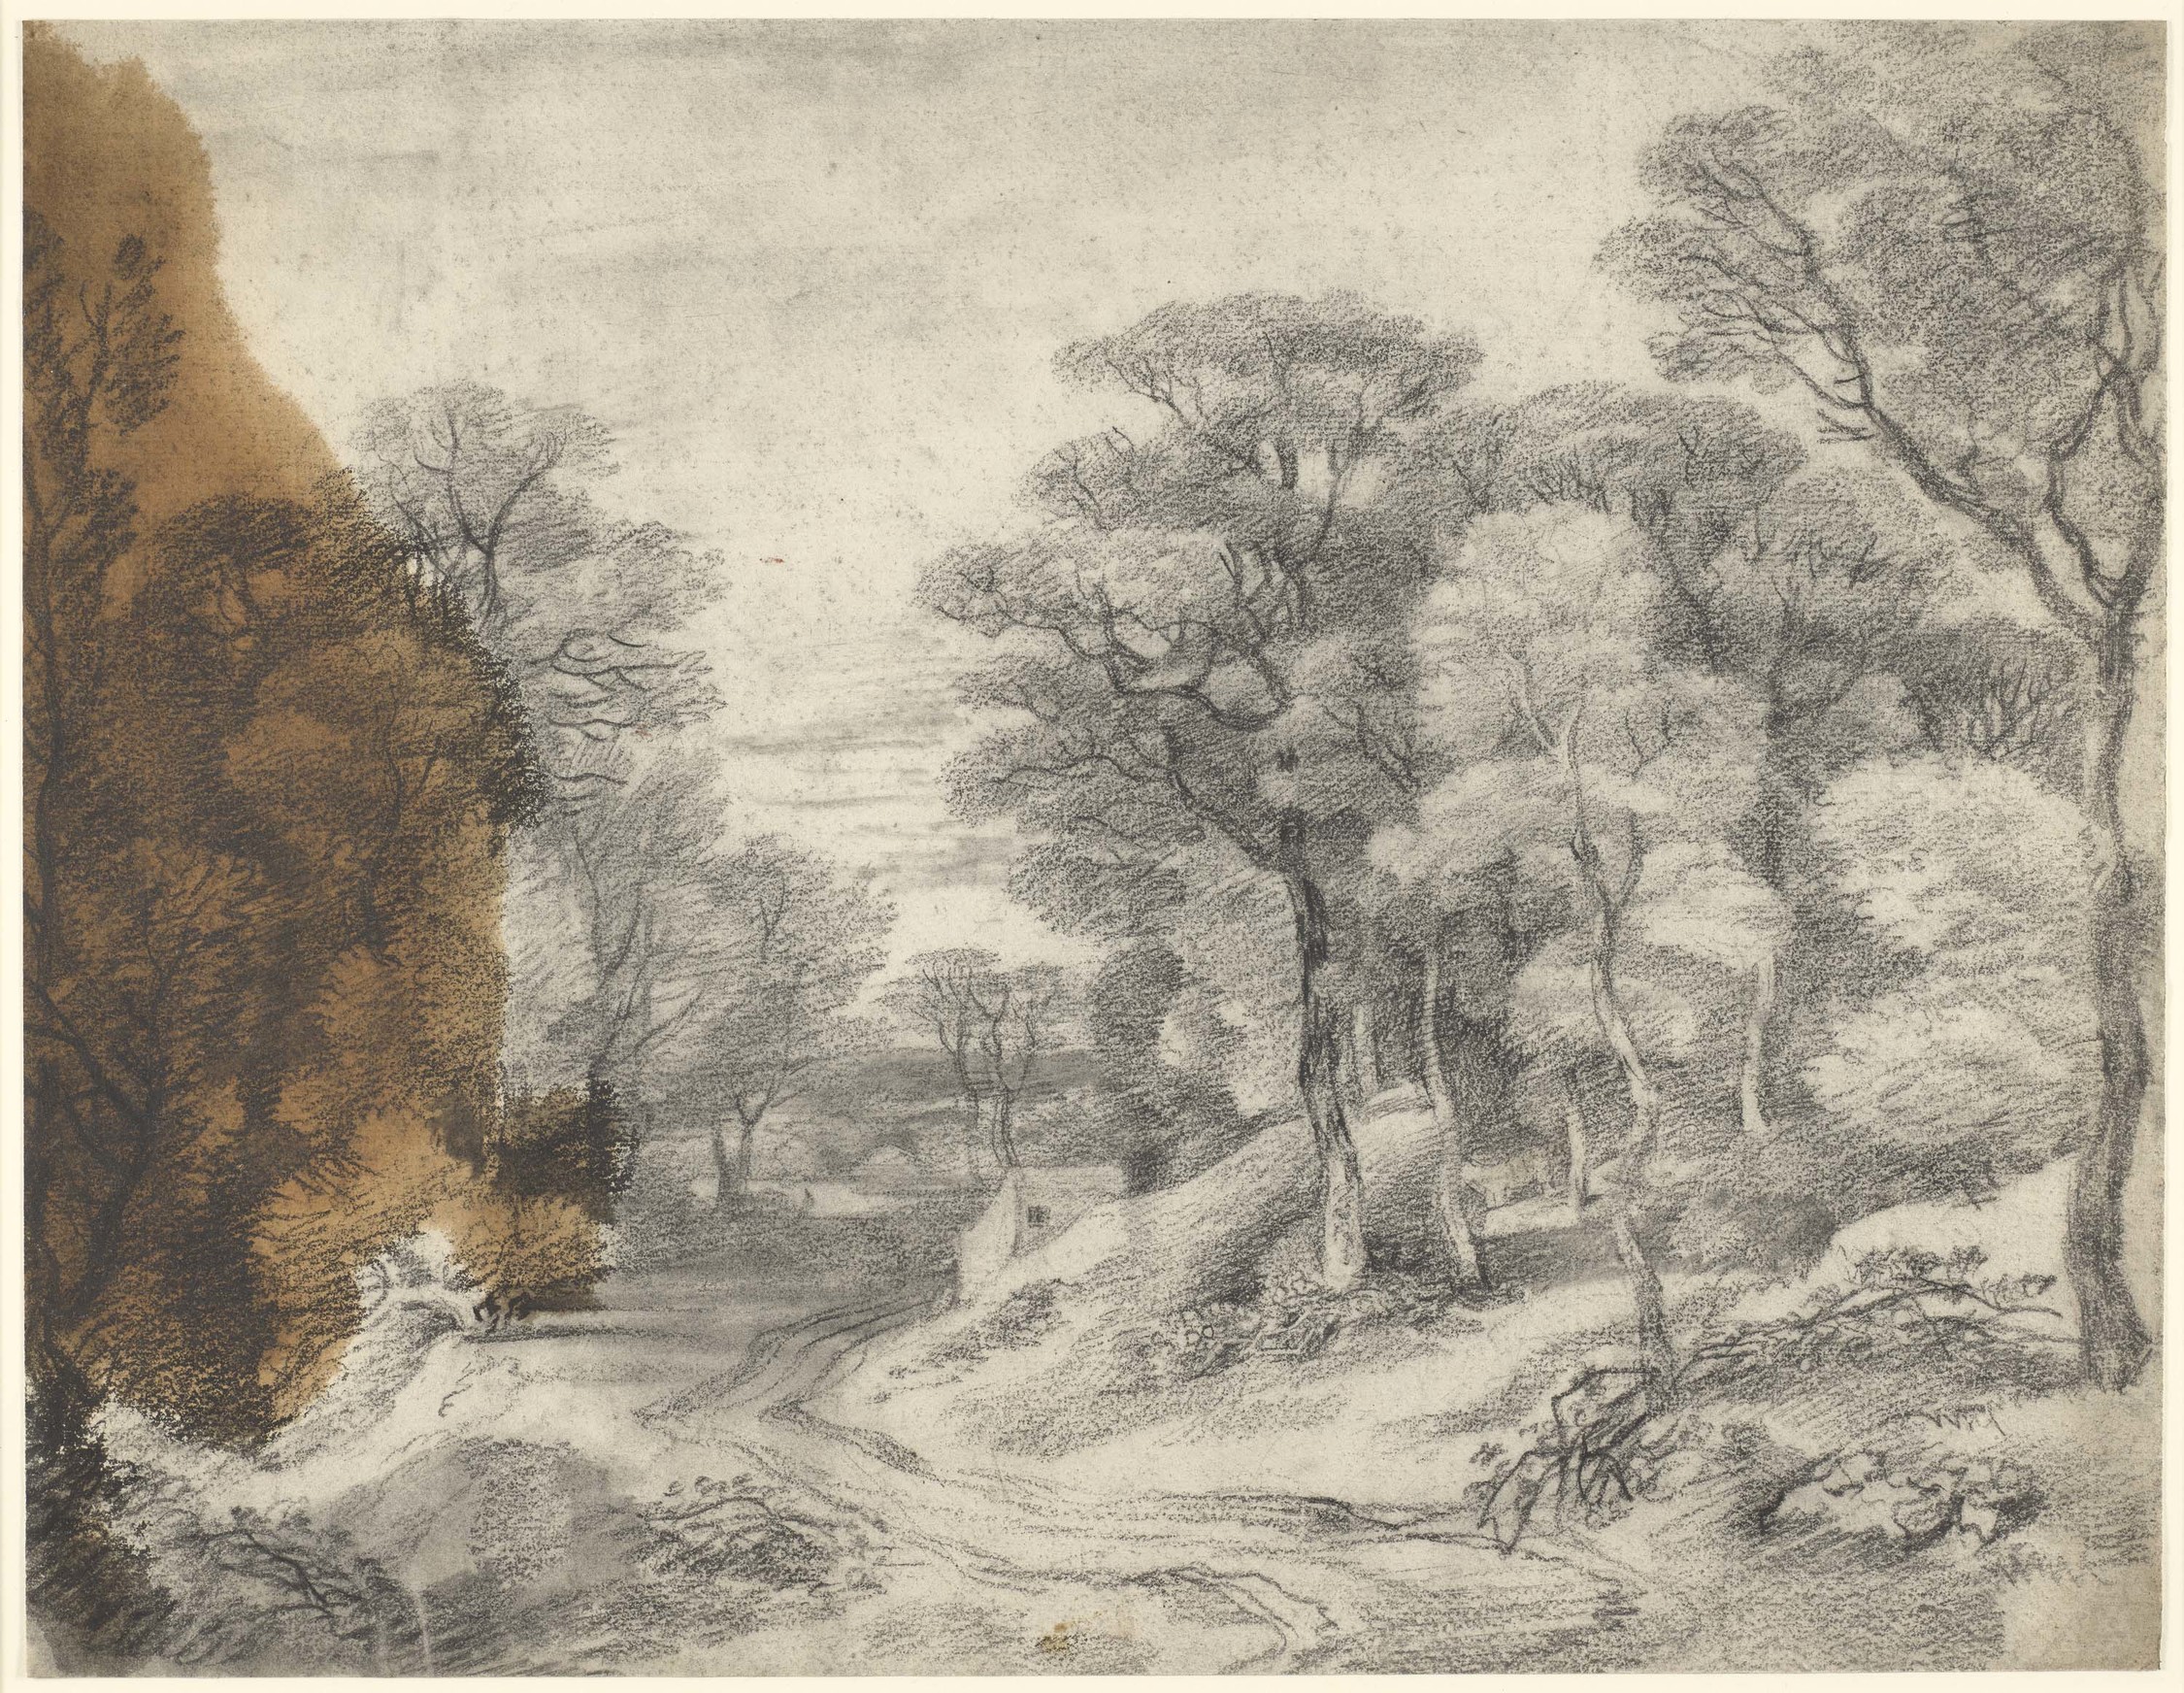 A&nbsp;drawing in black chalk and stump&nbsp;of a wooded landscape with a road winding through the centre, and a small house in the middle ground centre. Large oil stain at left. 
This drawing is one of 25 landscape drawings in the Royal Collection that w